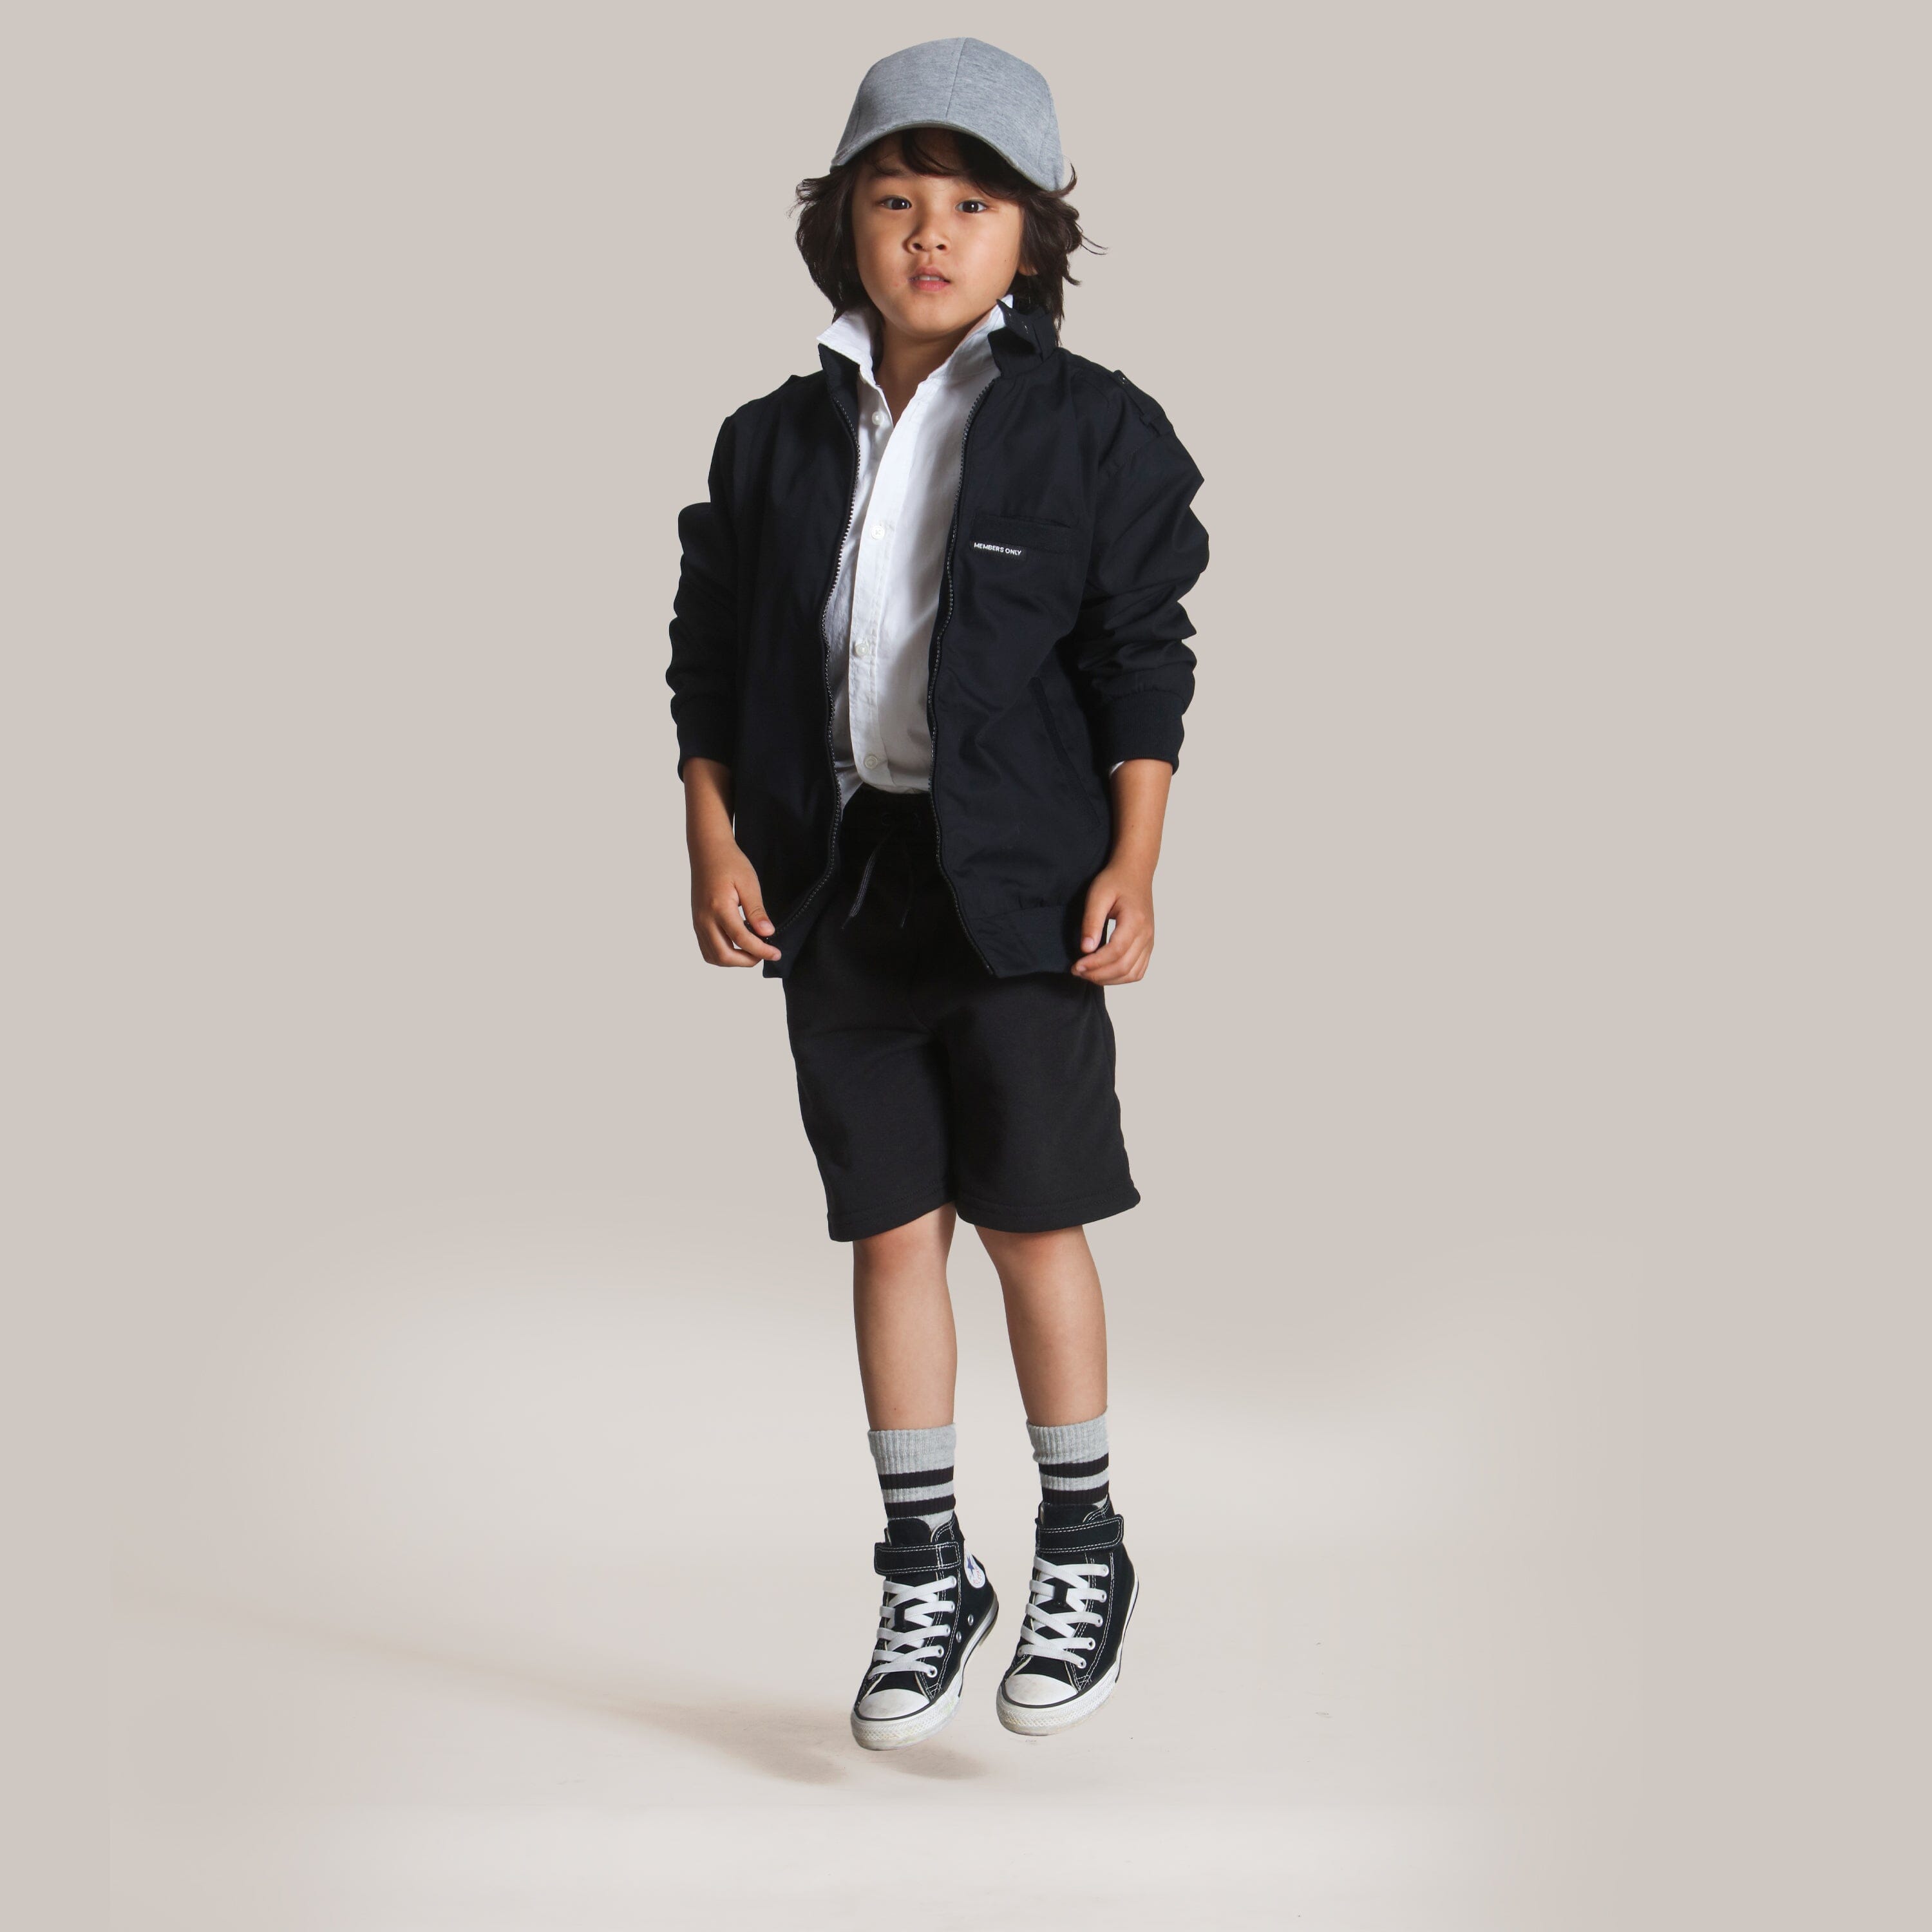 Boy's Iconic Racer Jacket Kid's Jacket Members Only 